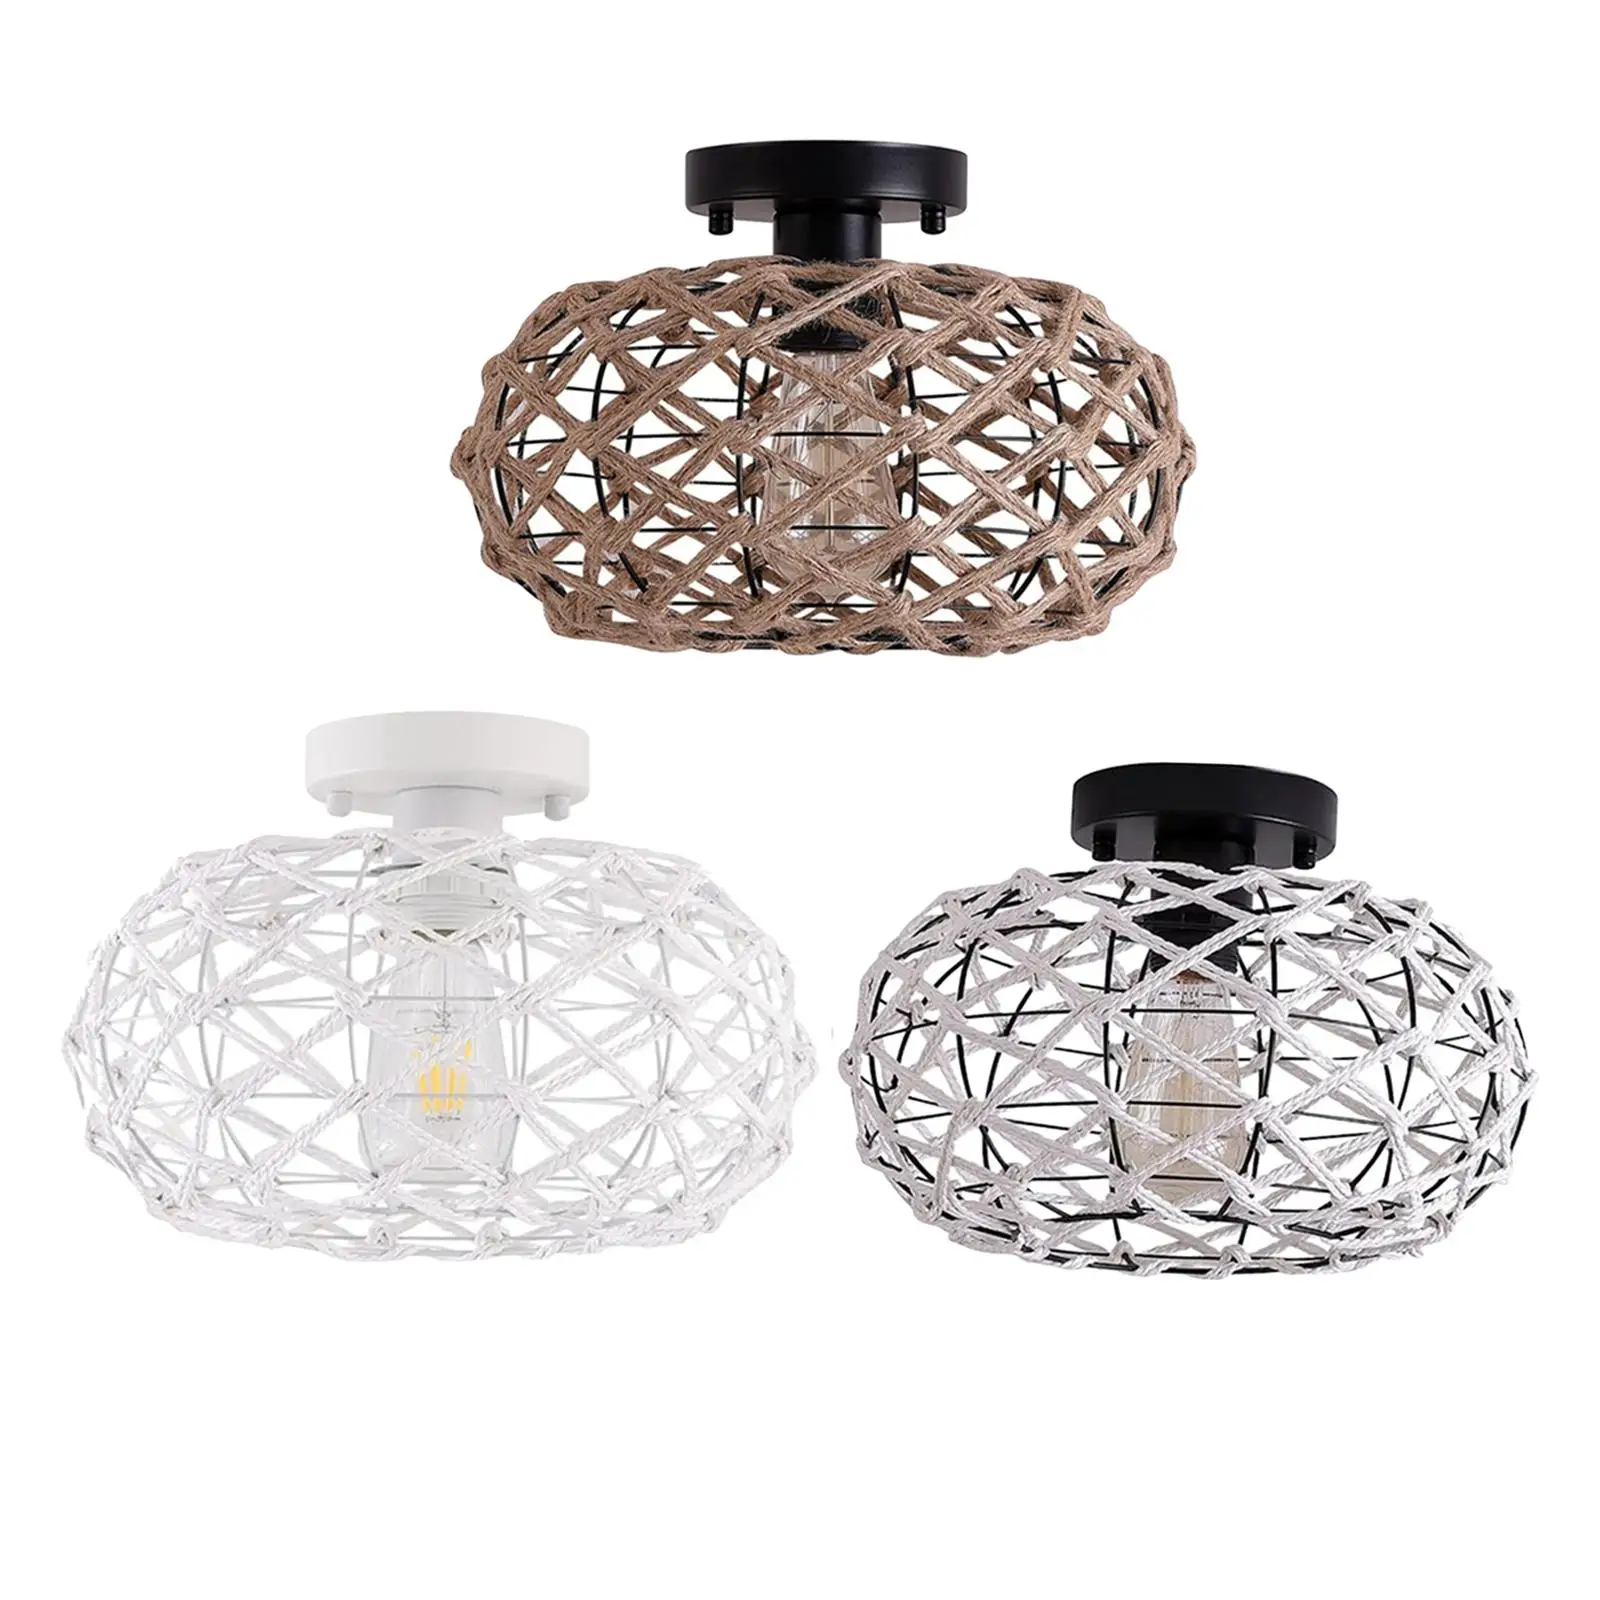 Classic Woven Lamp Shade Pendant Light Cover Ornament Lampshade for Dining Room Office Kitchen Island